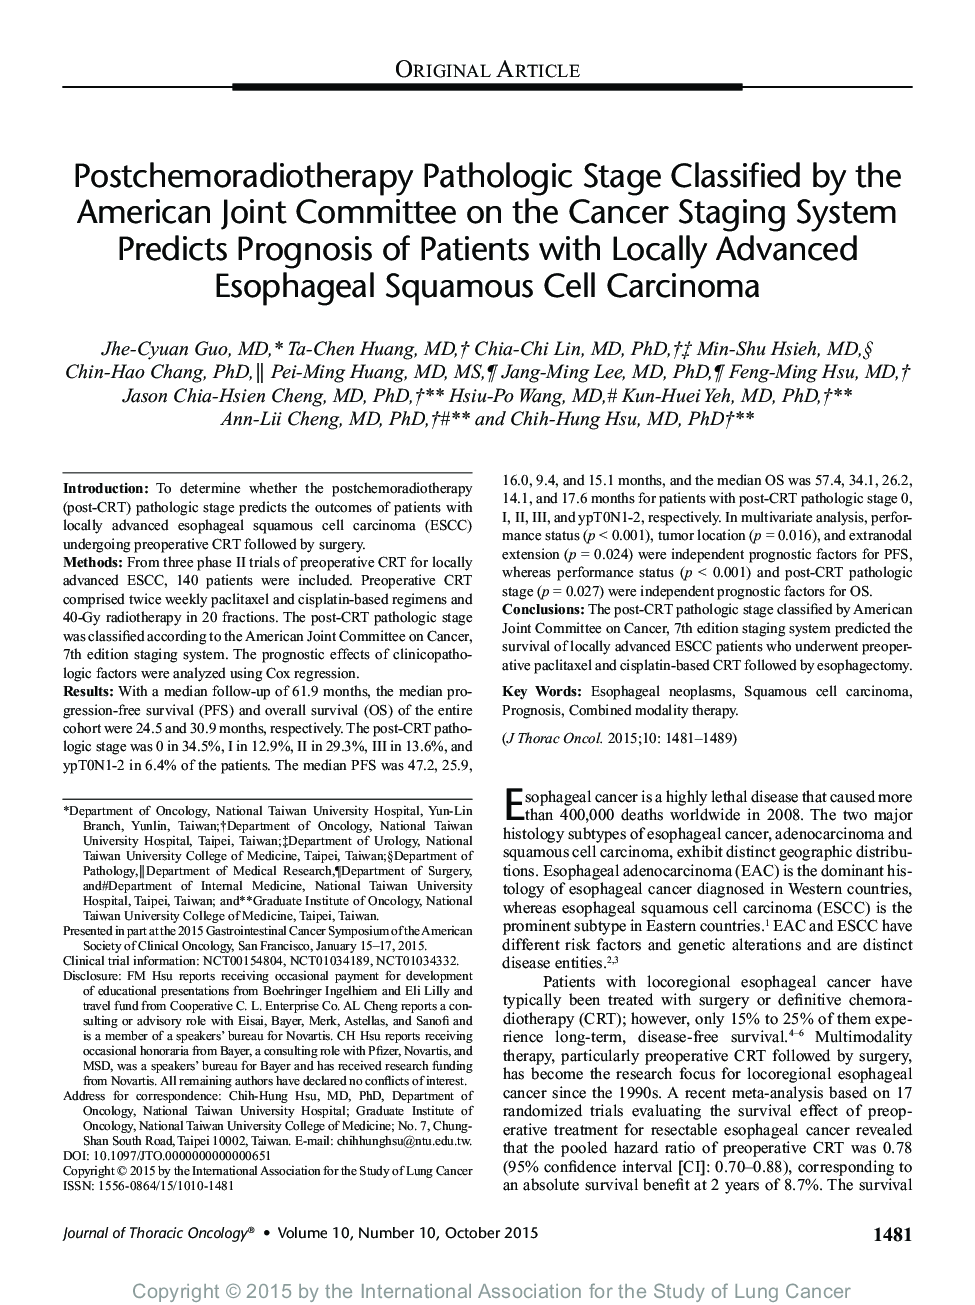 Postchemoradiotherapy Pathologic Stage Classified by the American Joint Committee on the Cancer Staging System Predicts Prognosis of Patients with Locally Advanced Esophageal Squamous Cell Carcinoma